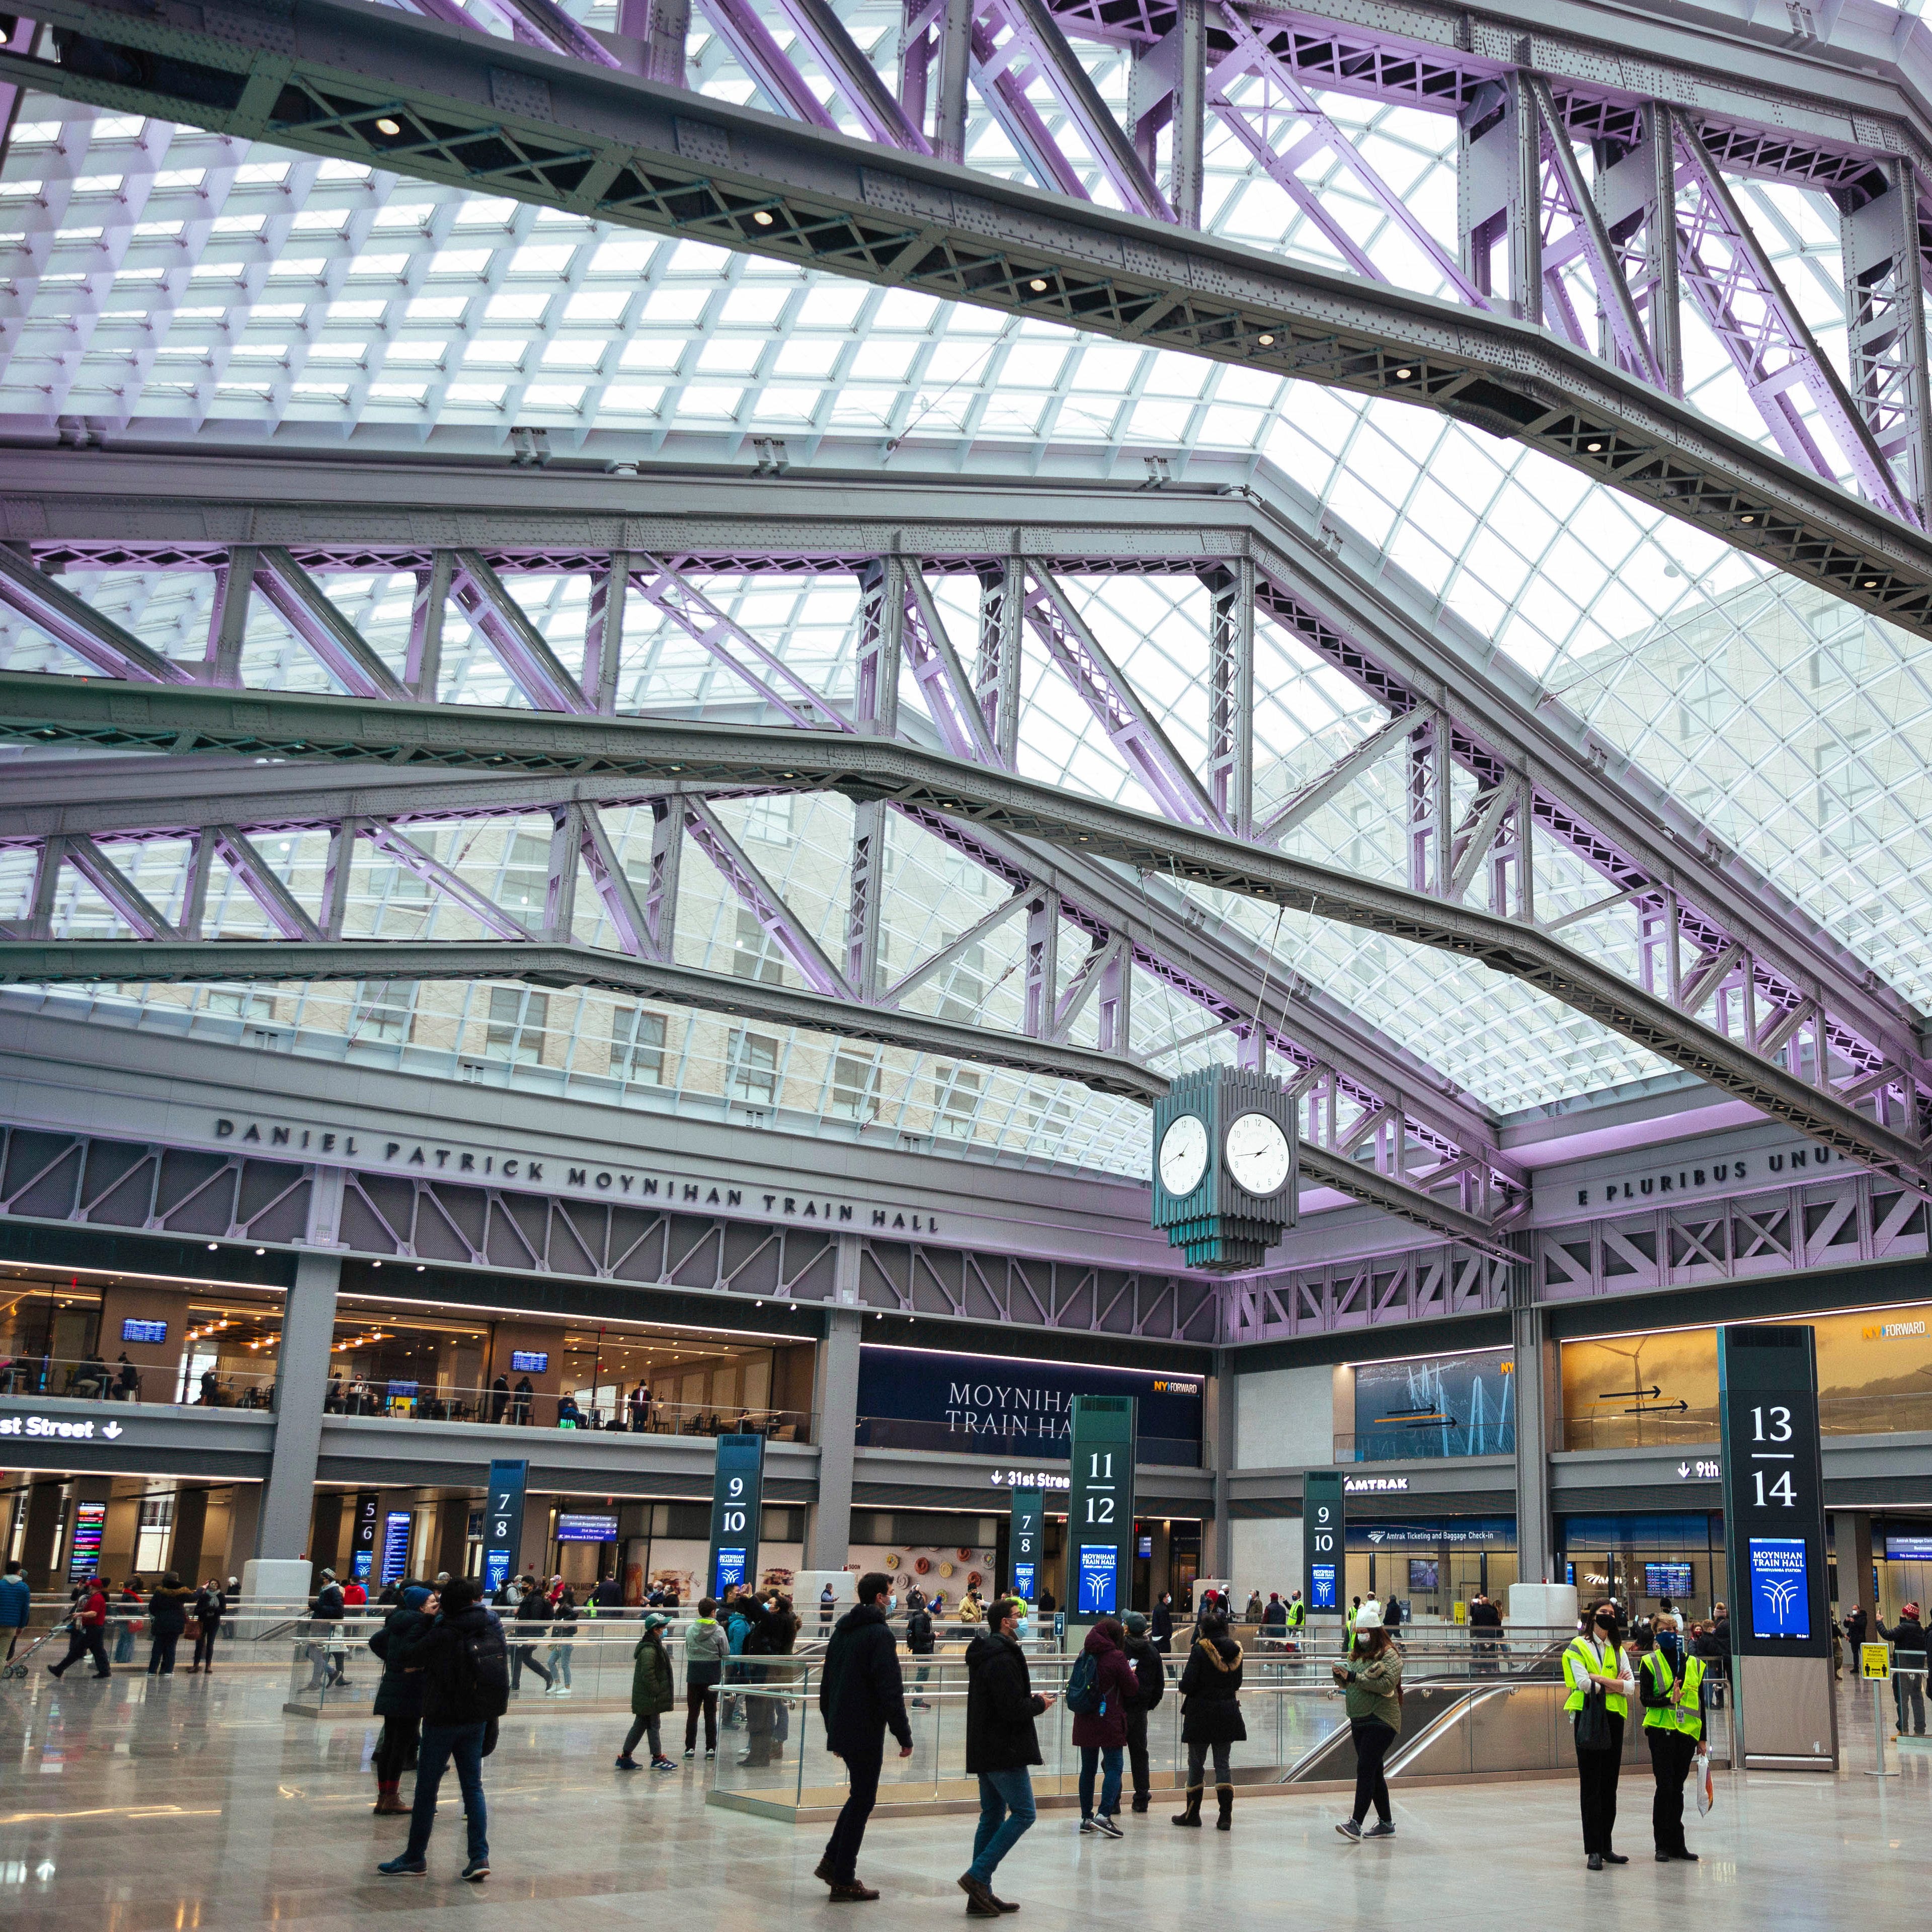 Passengers mill about on opening day at the newly-completed Moynihan Train Hall Friday, Jan. 1, 2021, in New York. The new 255,000-square-foot station is named after U.S. Sen. Daniel Patrick Moynihan, a Democrat who championed the project and died in 2003. (AP Photo/Kevin Hagen).